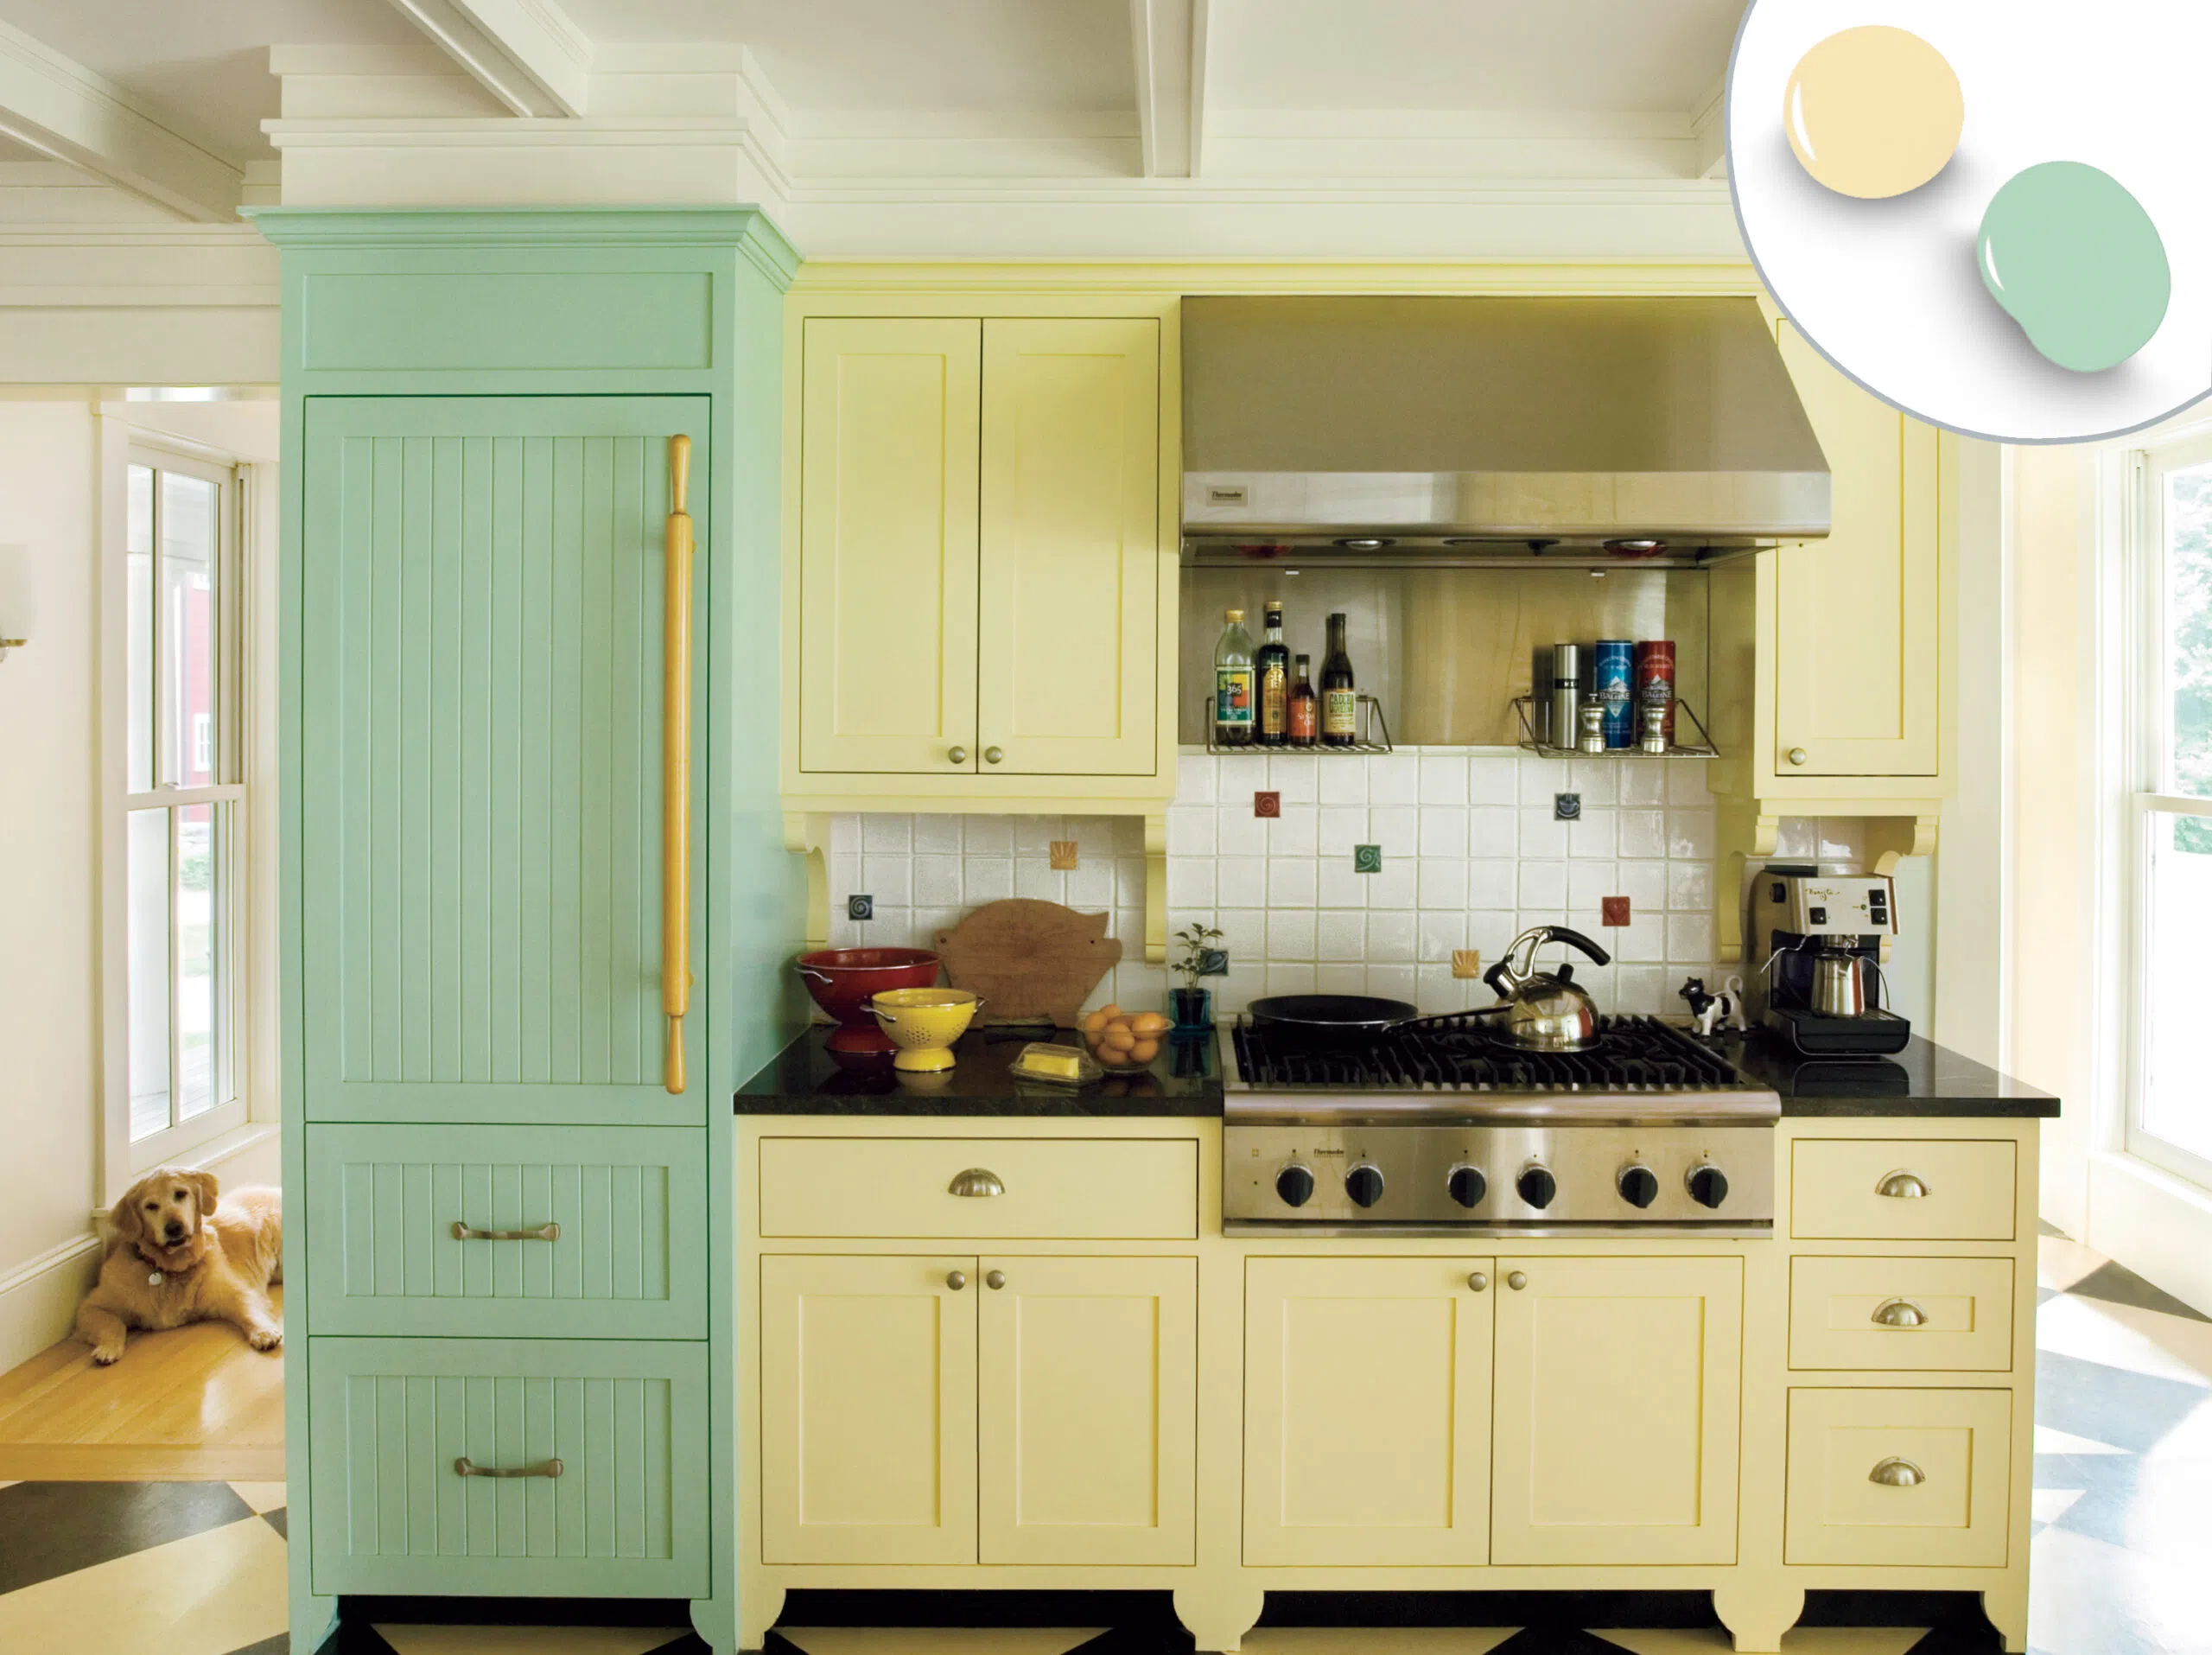 Pastel Blue and Yellow Two Tone Cabinets Kitchen .jpg